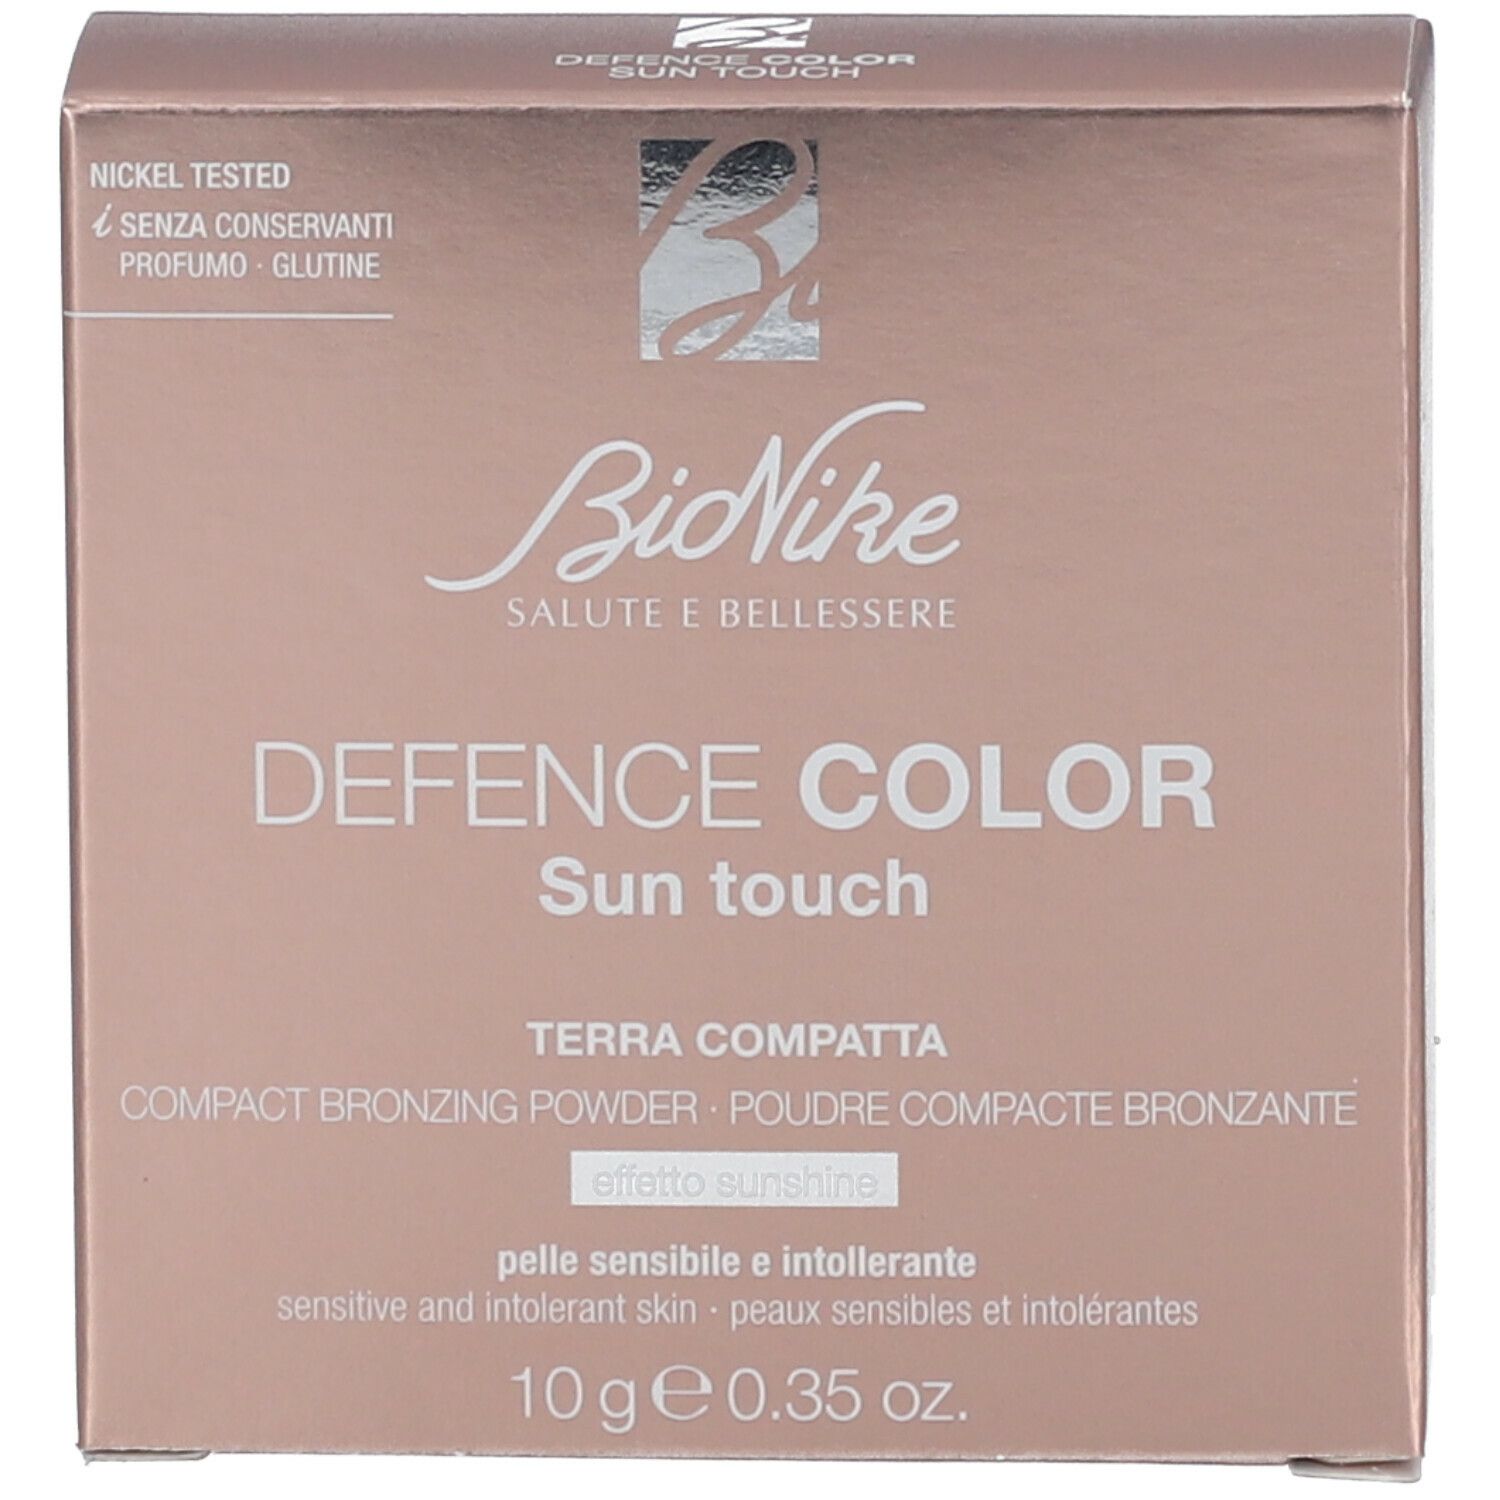 Bionike Defence Color Sun Touch 206